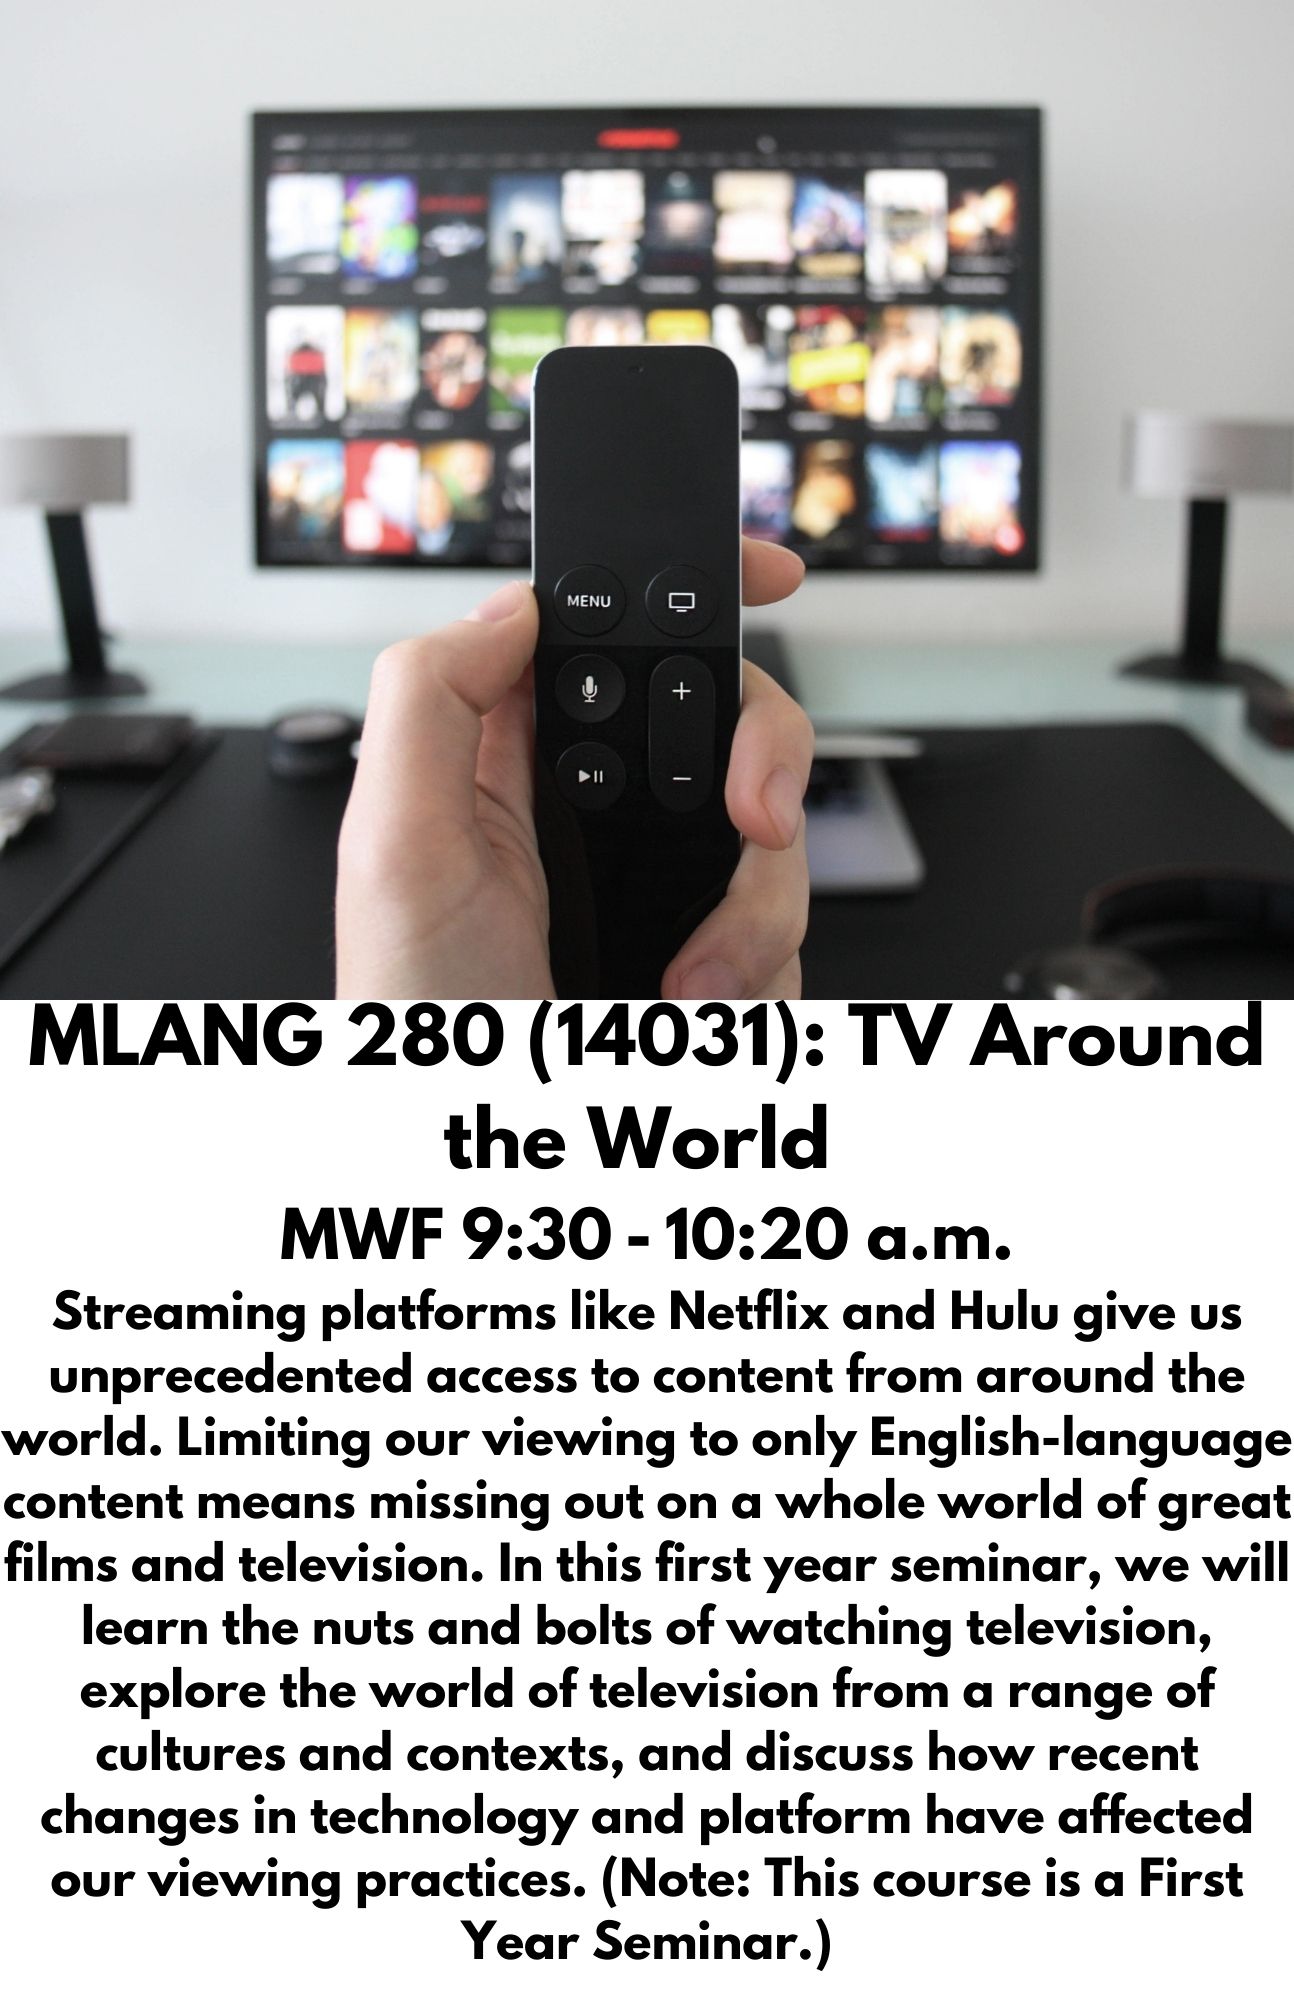 MLANG 280 (14031): TV Around the World  MWF 9:30 - 10:20 a.m. Streaming platforms like Netflix and Hulu give us unprecedented access to content from around the world. Limiting our viewing to only English-language content means missing out on a whole world of great films and television. In this first year seminar, we will learn the nuts and bolts of watching television, explore the world of television from a range of cultures and contexts, and discuss how recent changes in technology and platform have affected our viewing practices. (Note: This course is a First Year Seminar.)